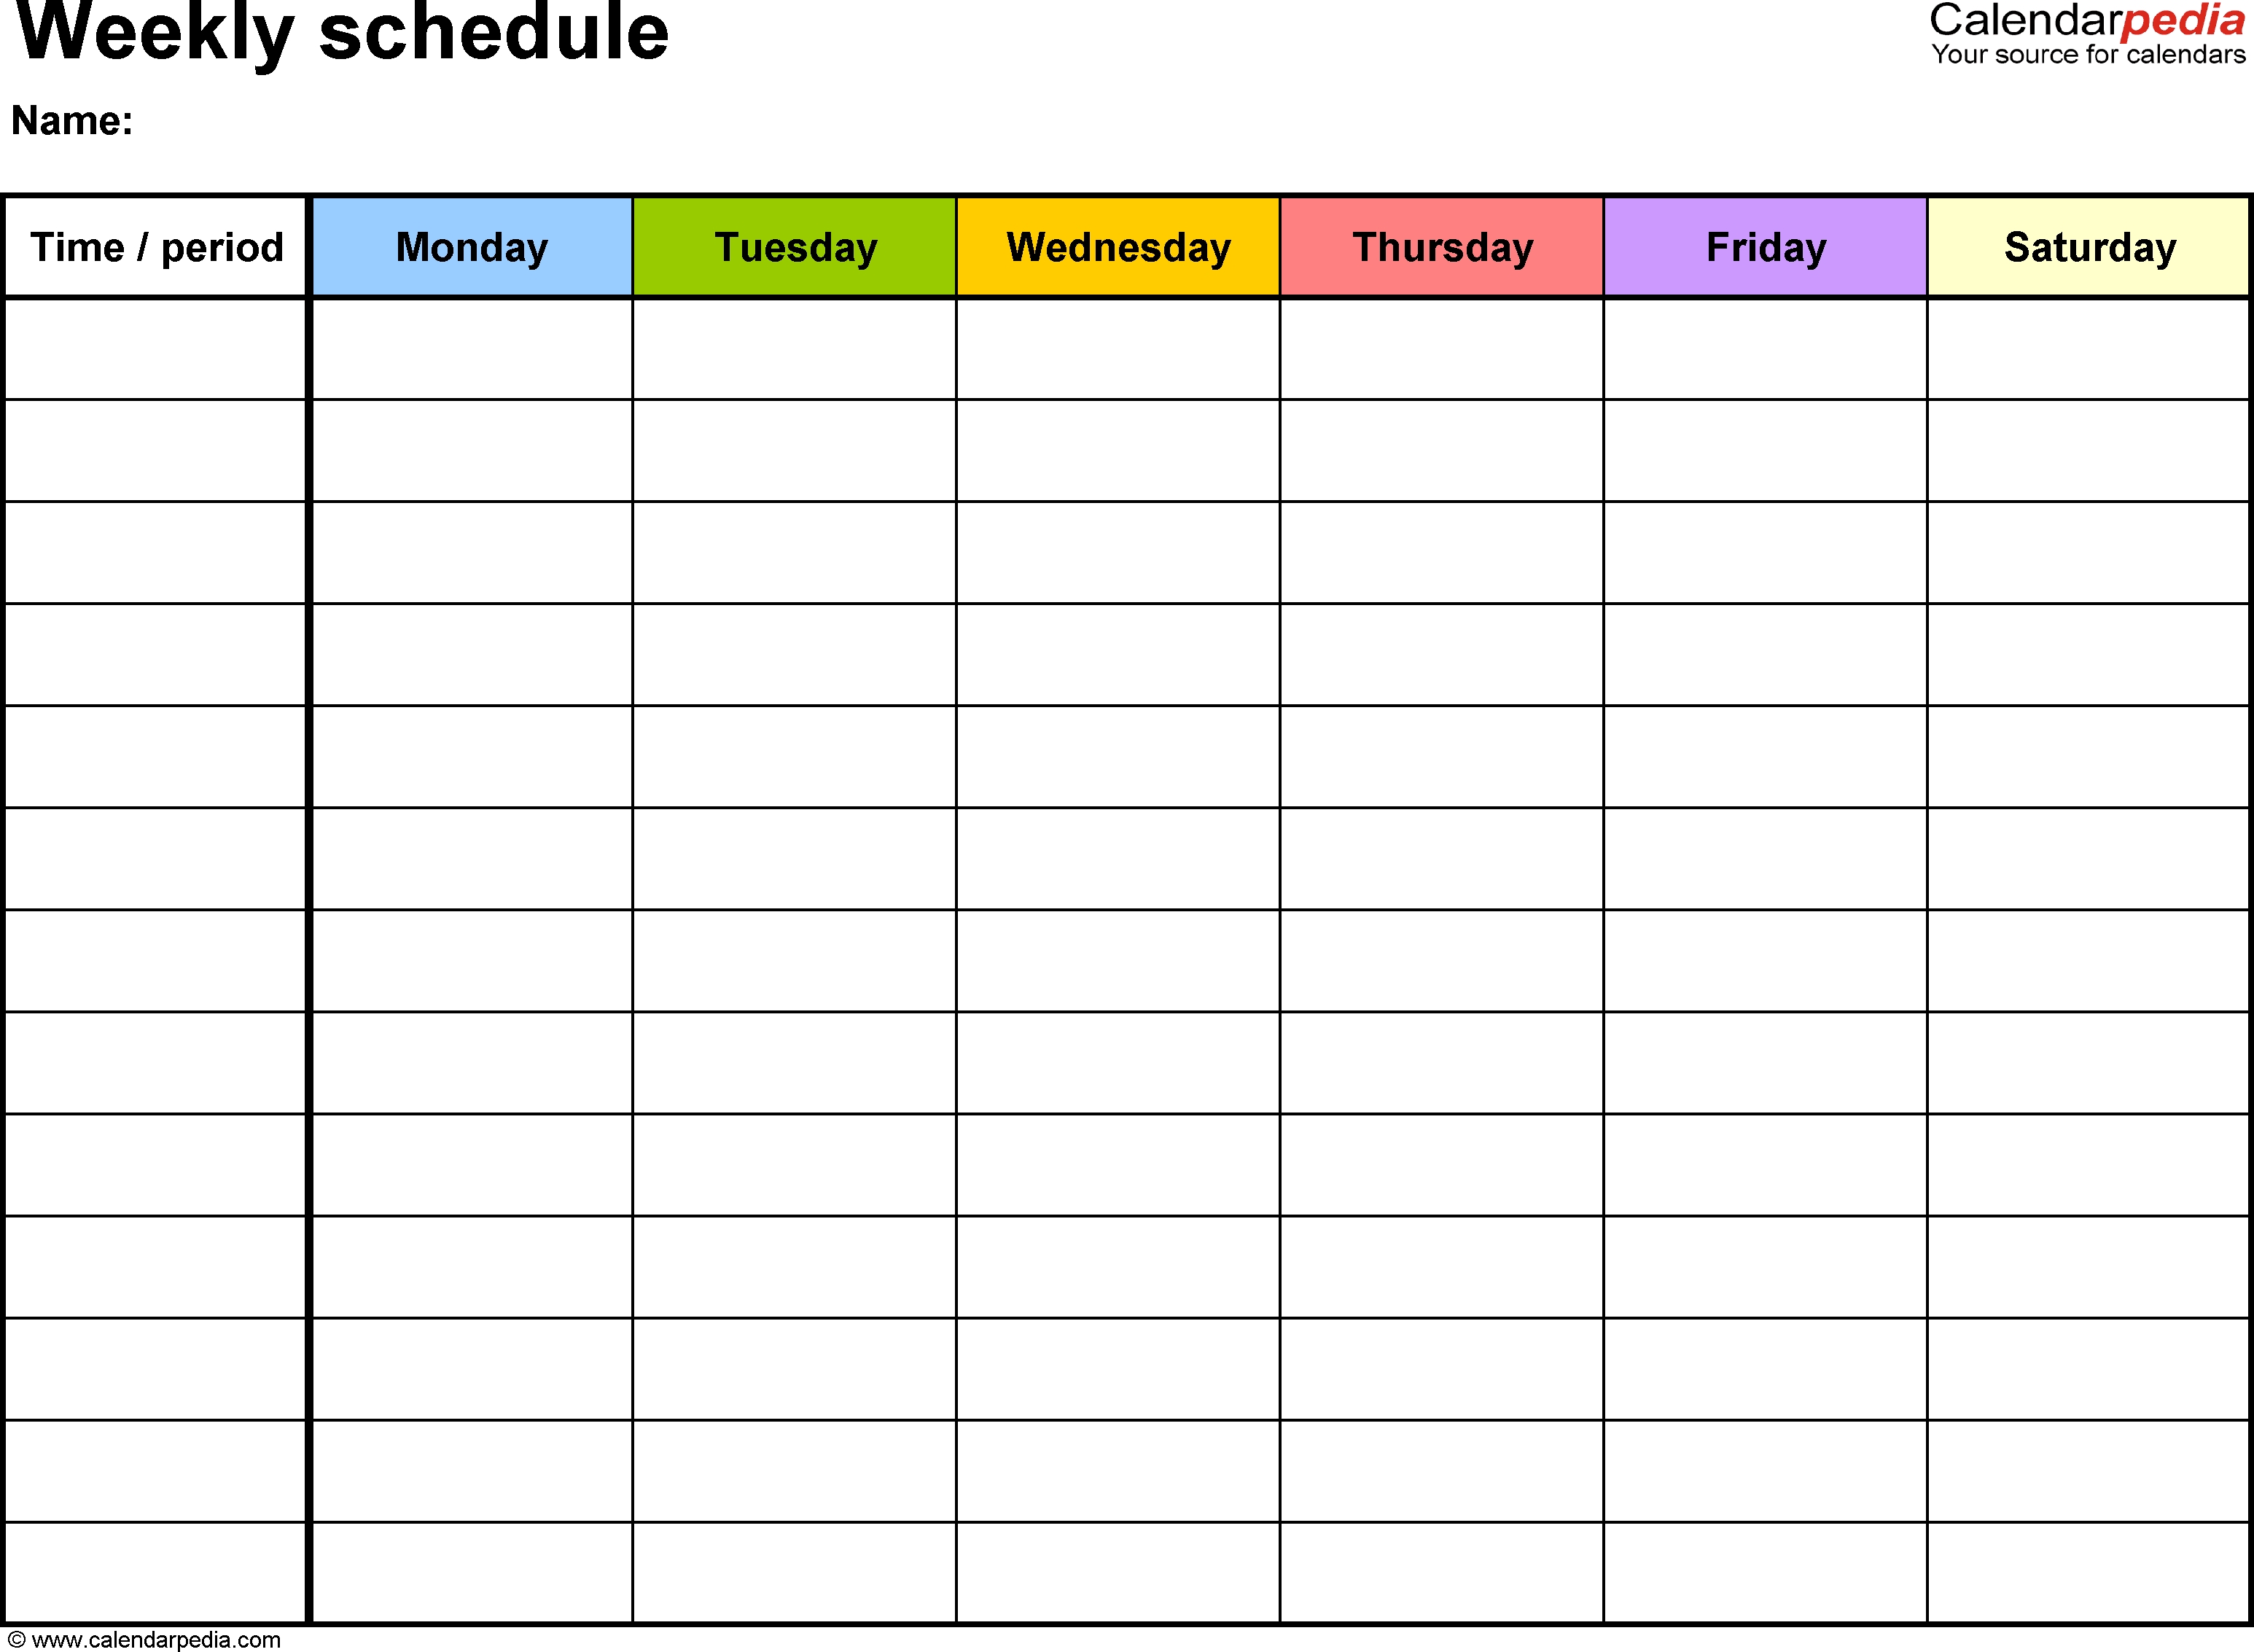 Weekly Schedule Download Free Templates For Word Template Habits 7 Habits Calendar Template